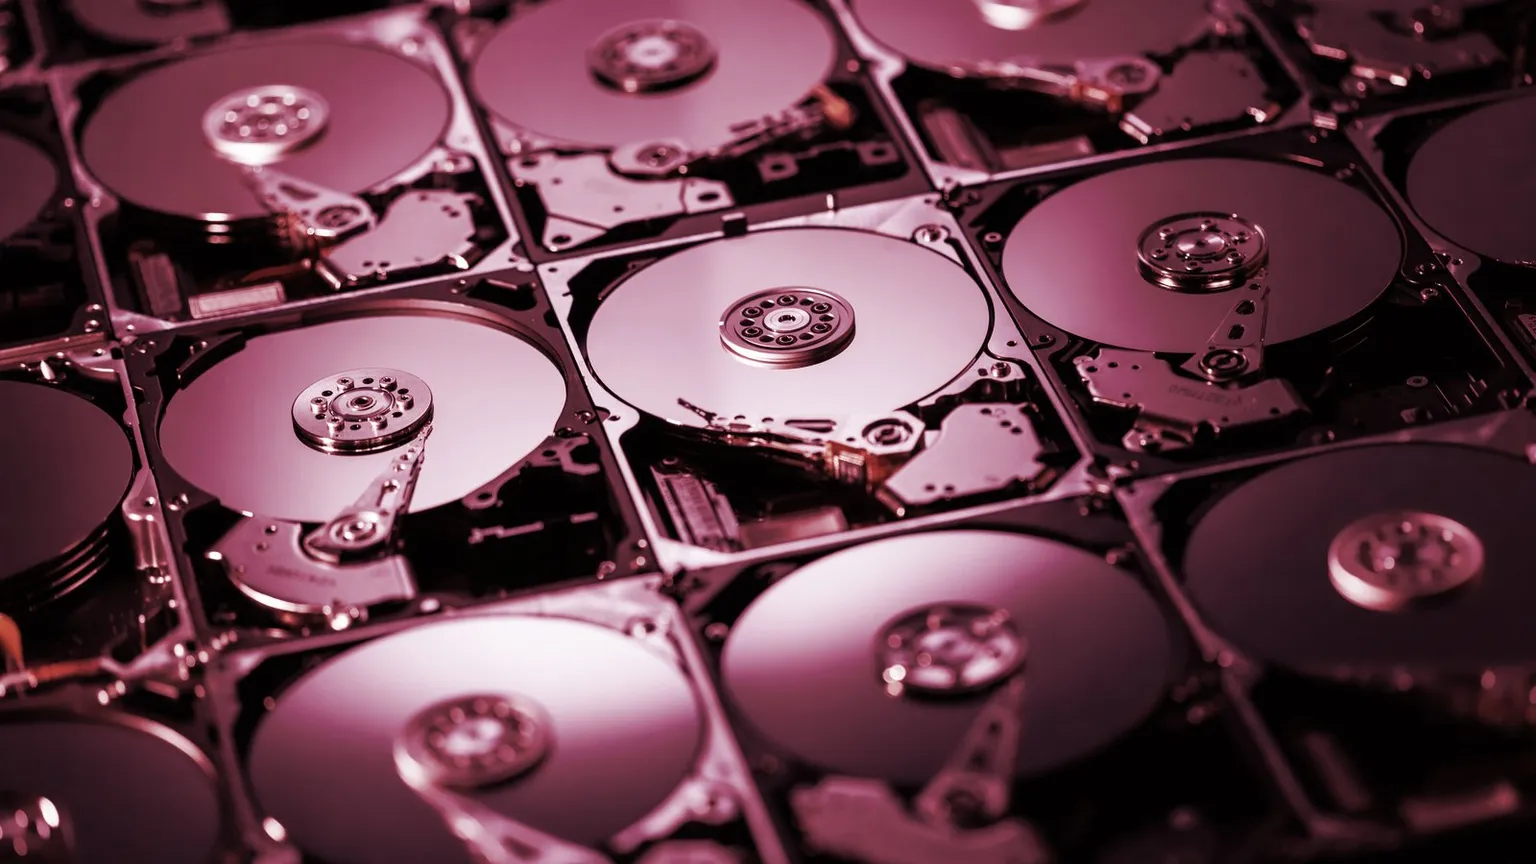 Hard drives are used to "farm" the Chia cryptocurrency. Image: Shutterstock